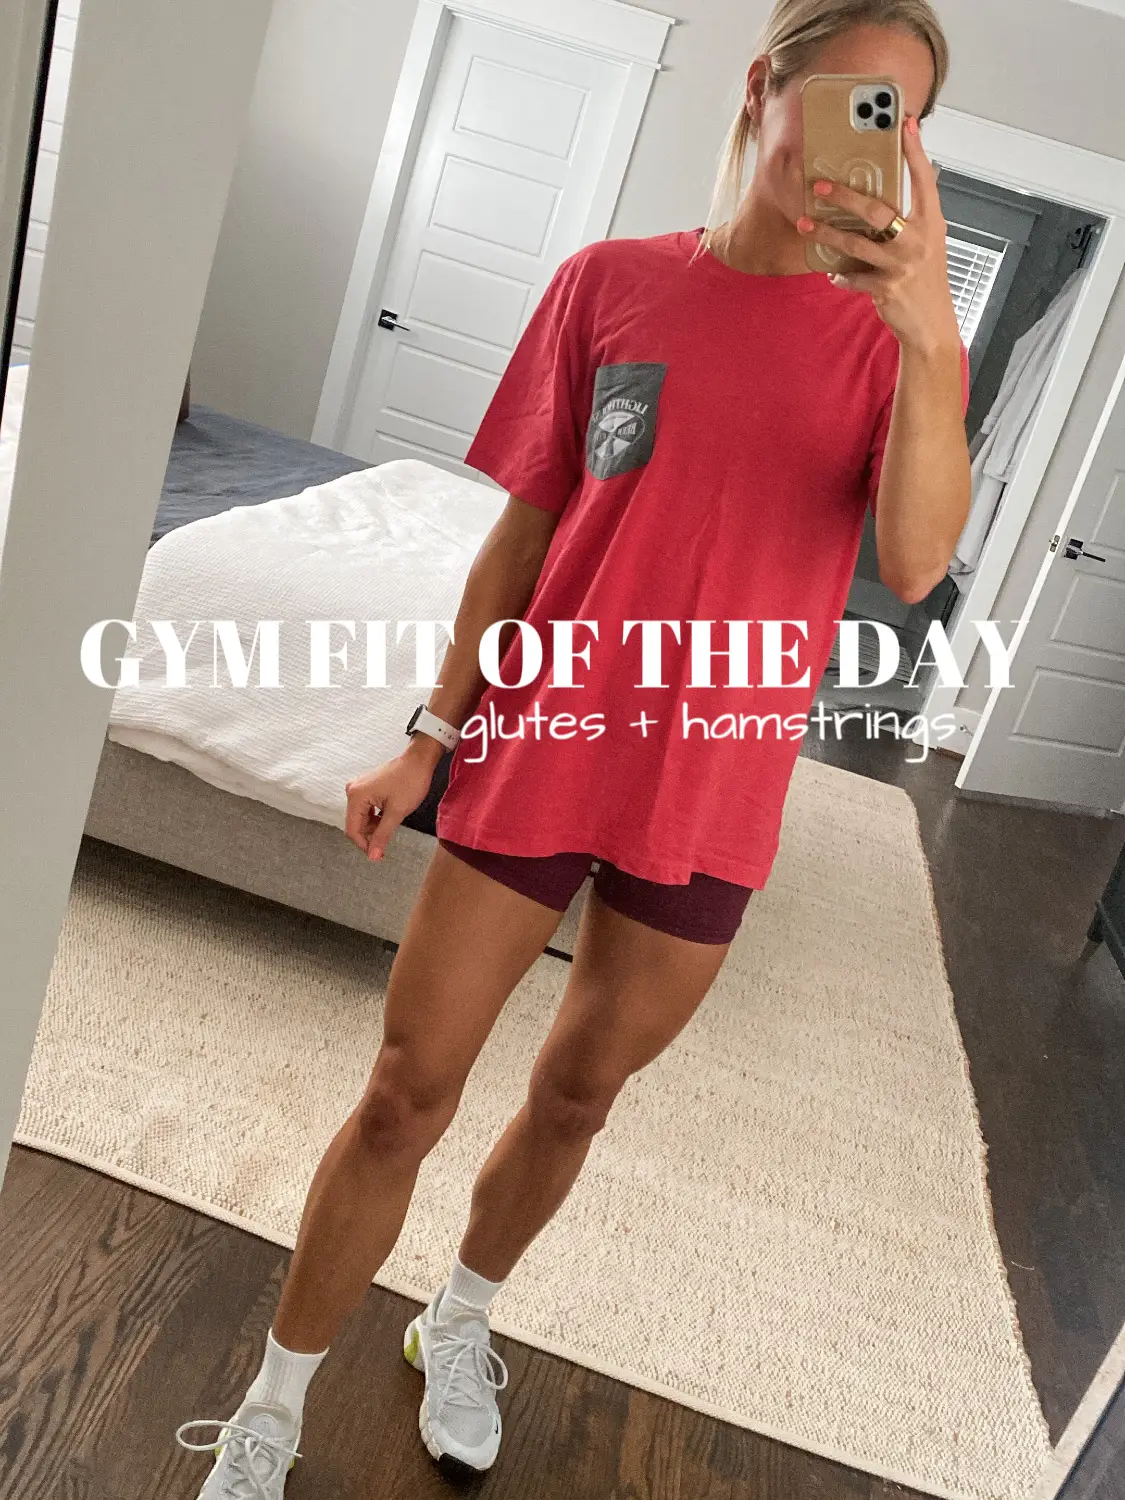 GYM FIT OF THE DAY, Gallery posted by julianna.rubino